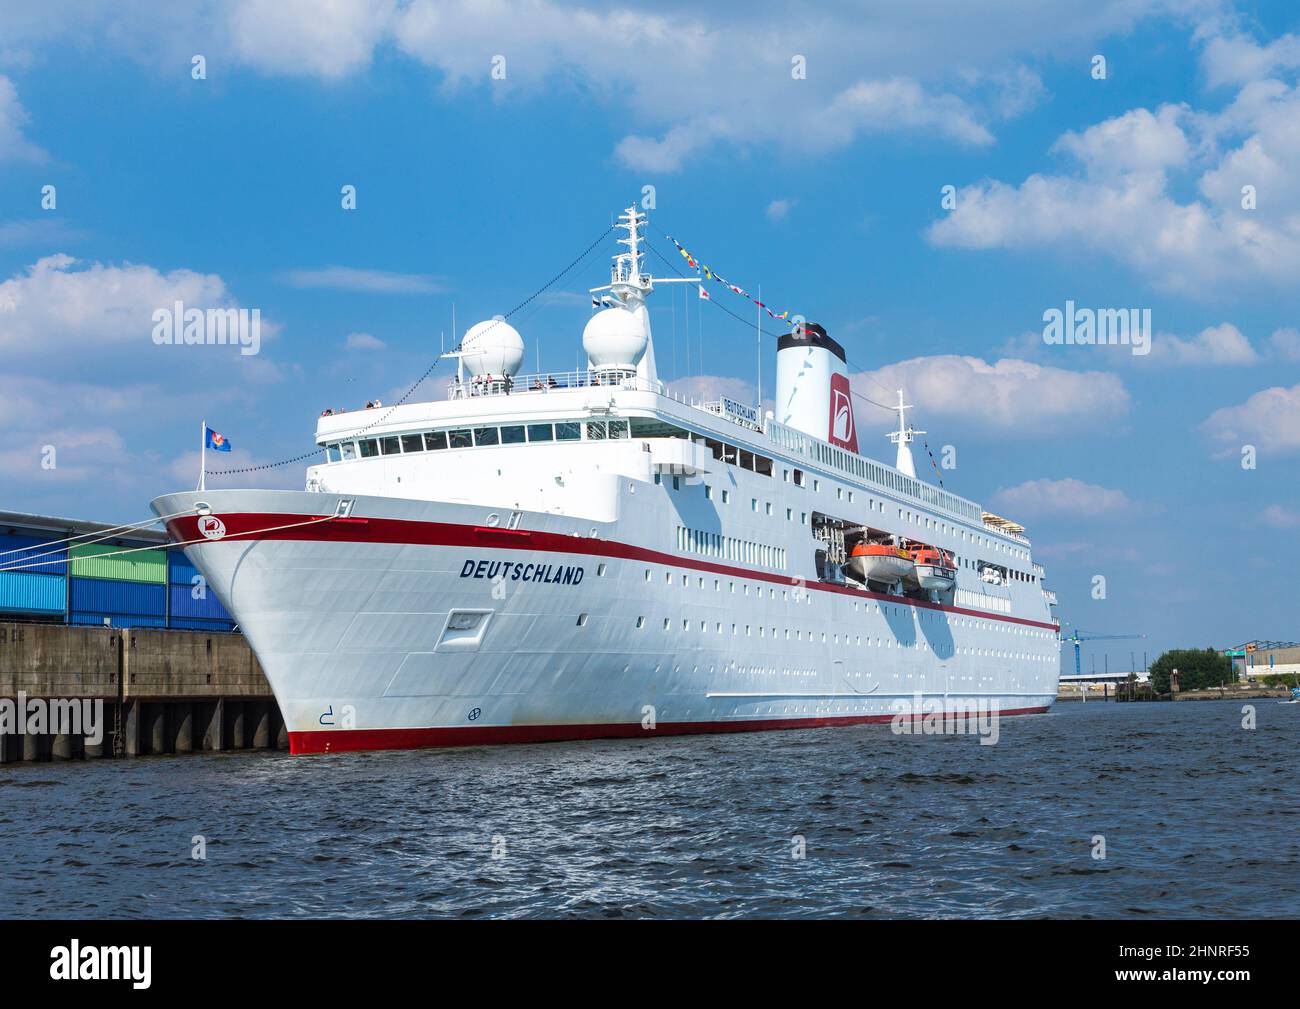 Cruise ship MS DEUTSCHLAND at river Elbe Stock Photo - Alamy